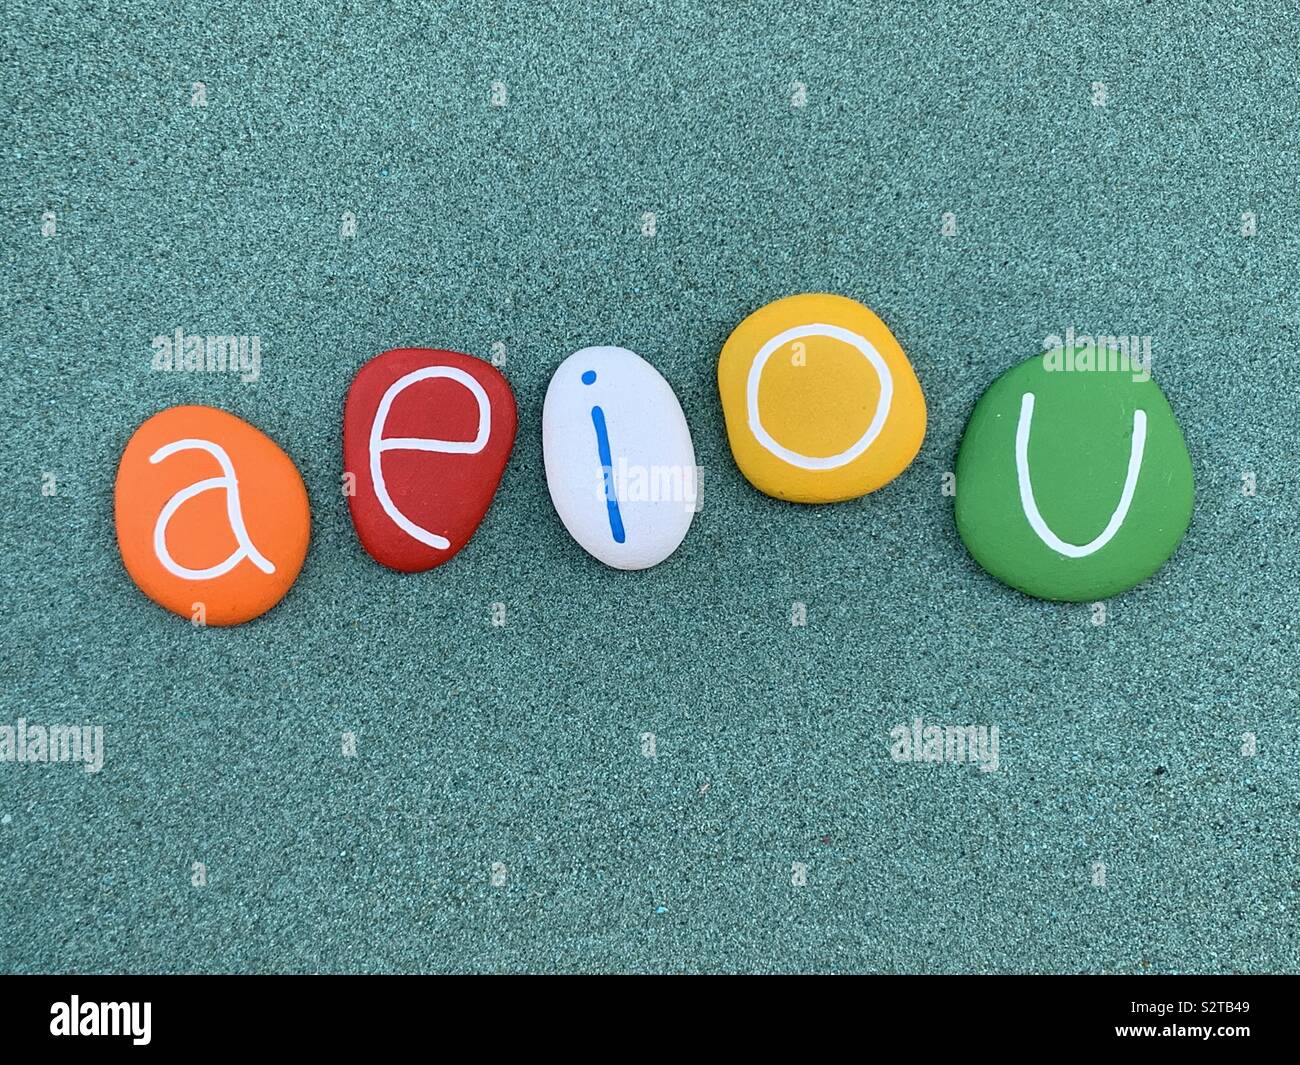 A,e,i,o,u, vocal letters of the alphabet composed with colored stones over green sand Stock Photo